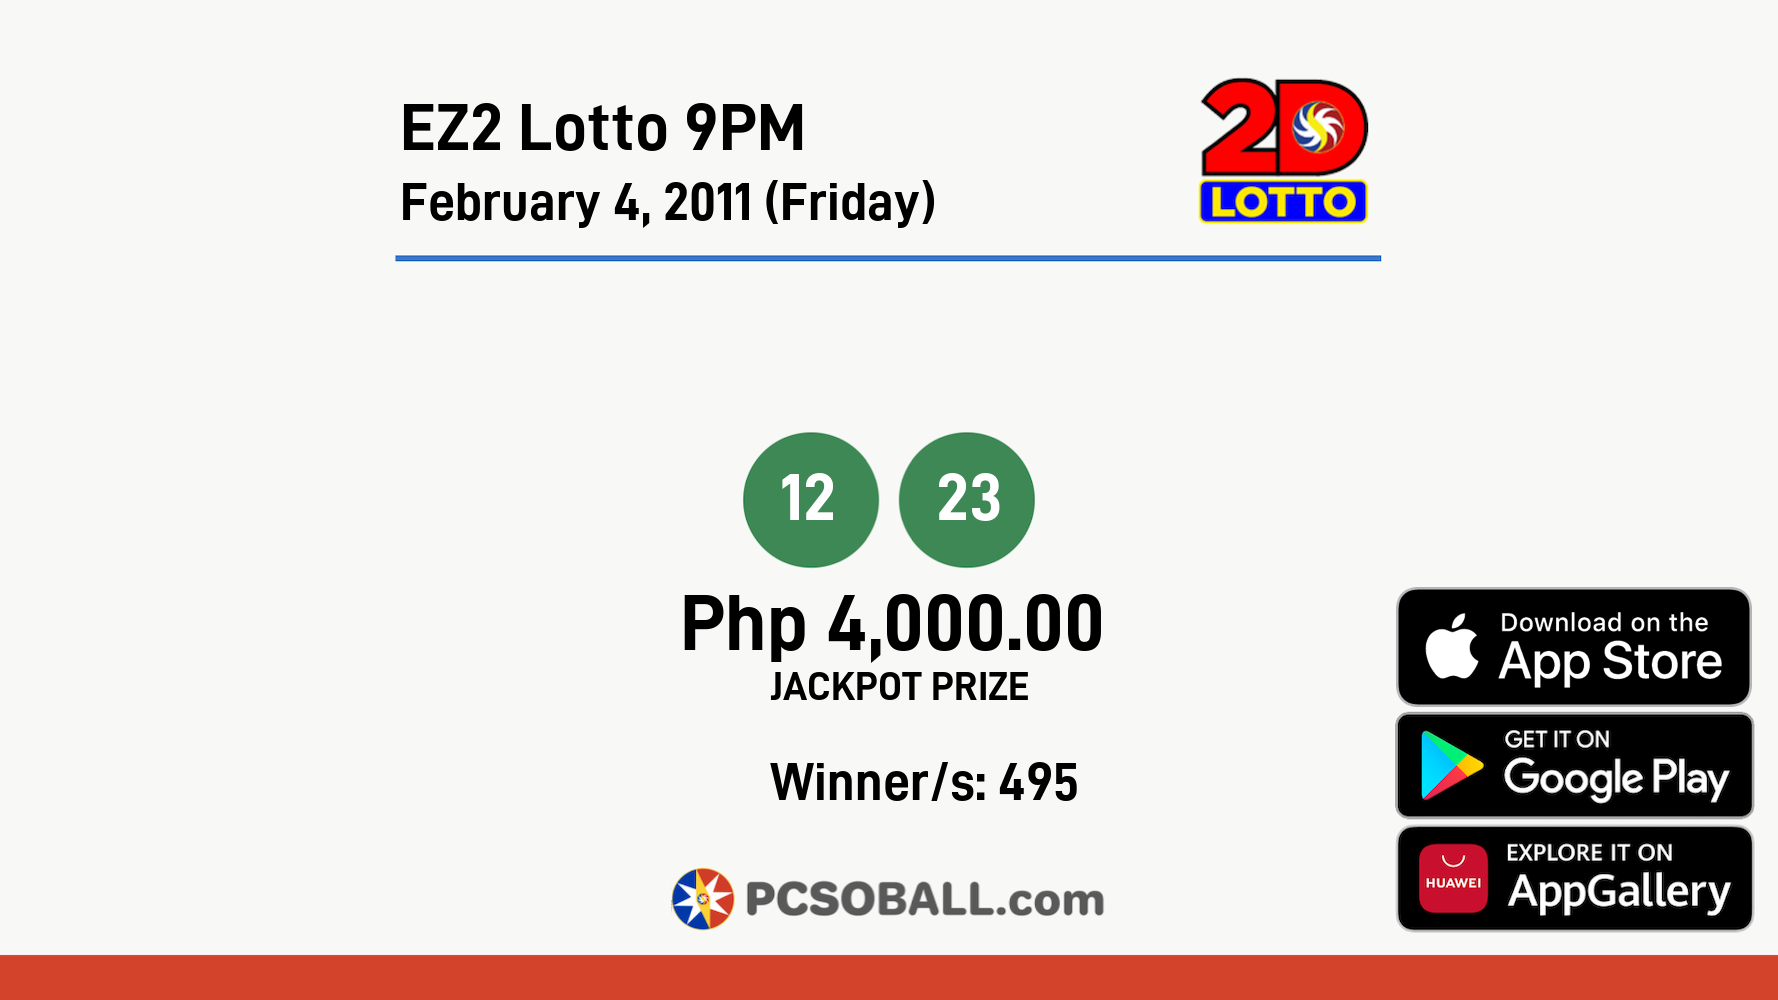 EZ2 Lotto 9PM February 4, 2011 (Friday) Result